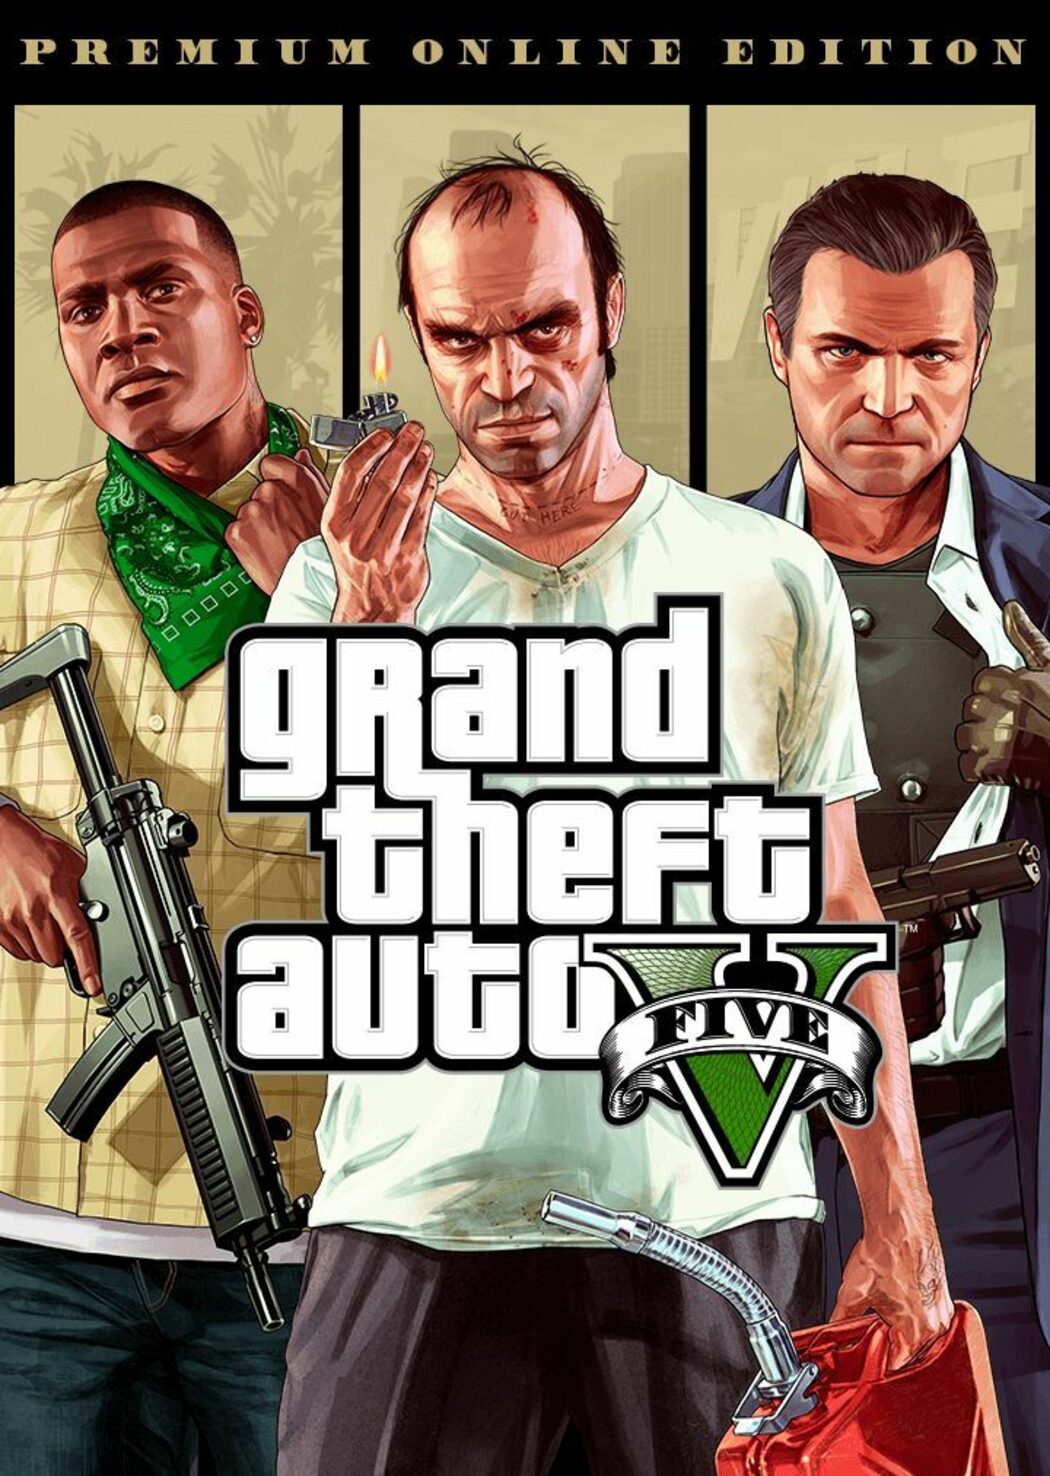 what is the difference in grand theft auto 5 premium online edition and regular grand theft auto 5